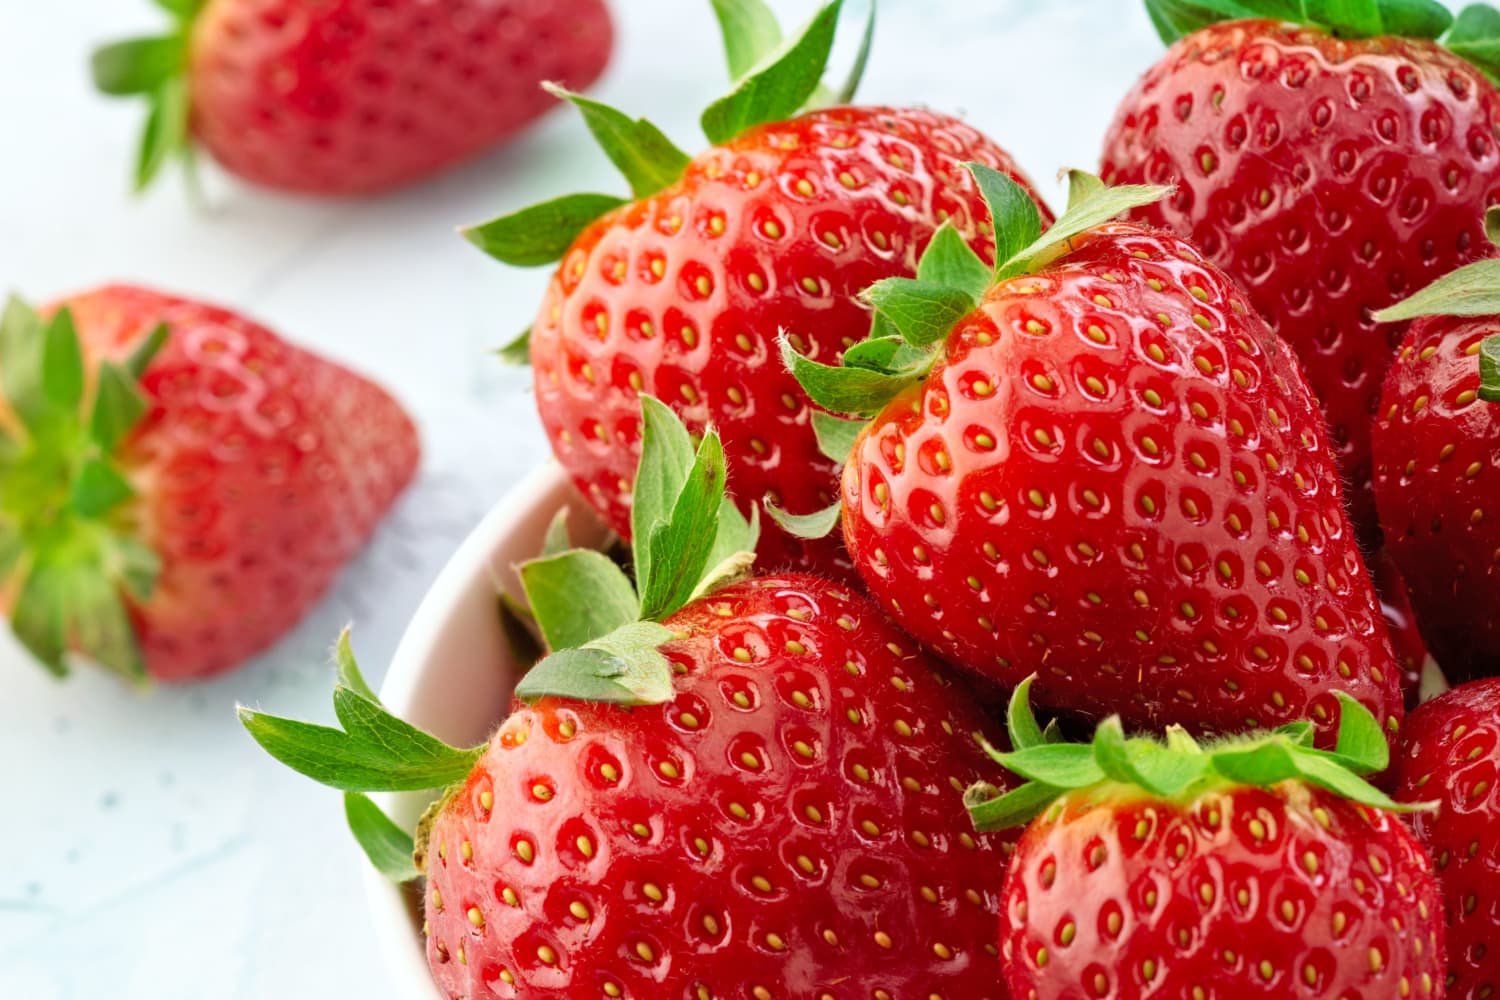 How to Store Strawberries: We Tested 6 Methods to Find the Best Results